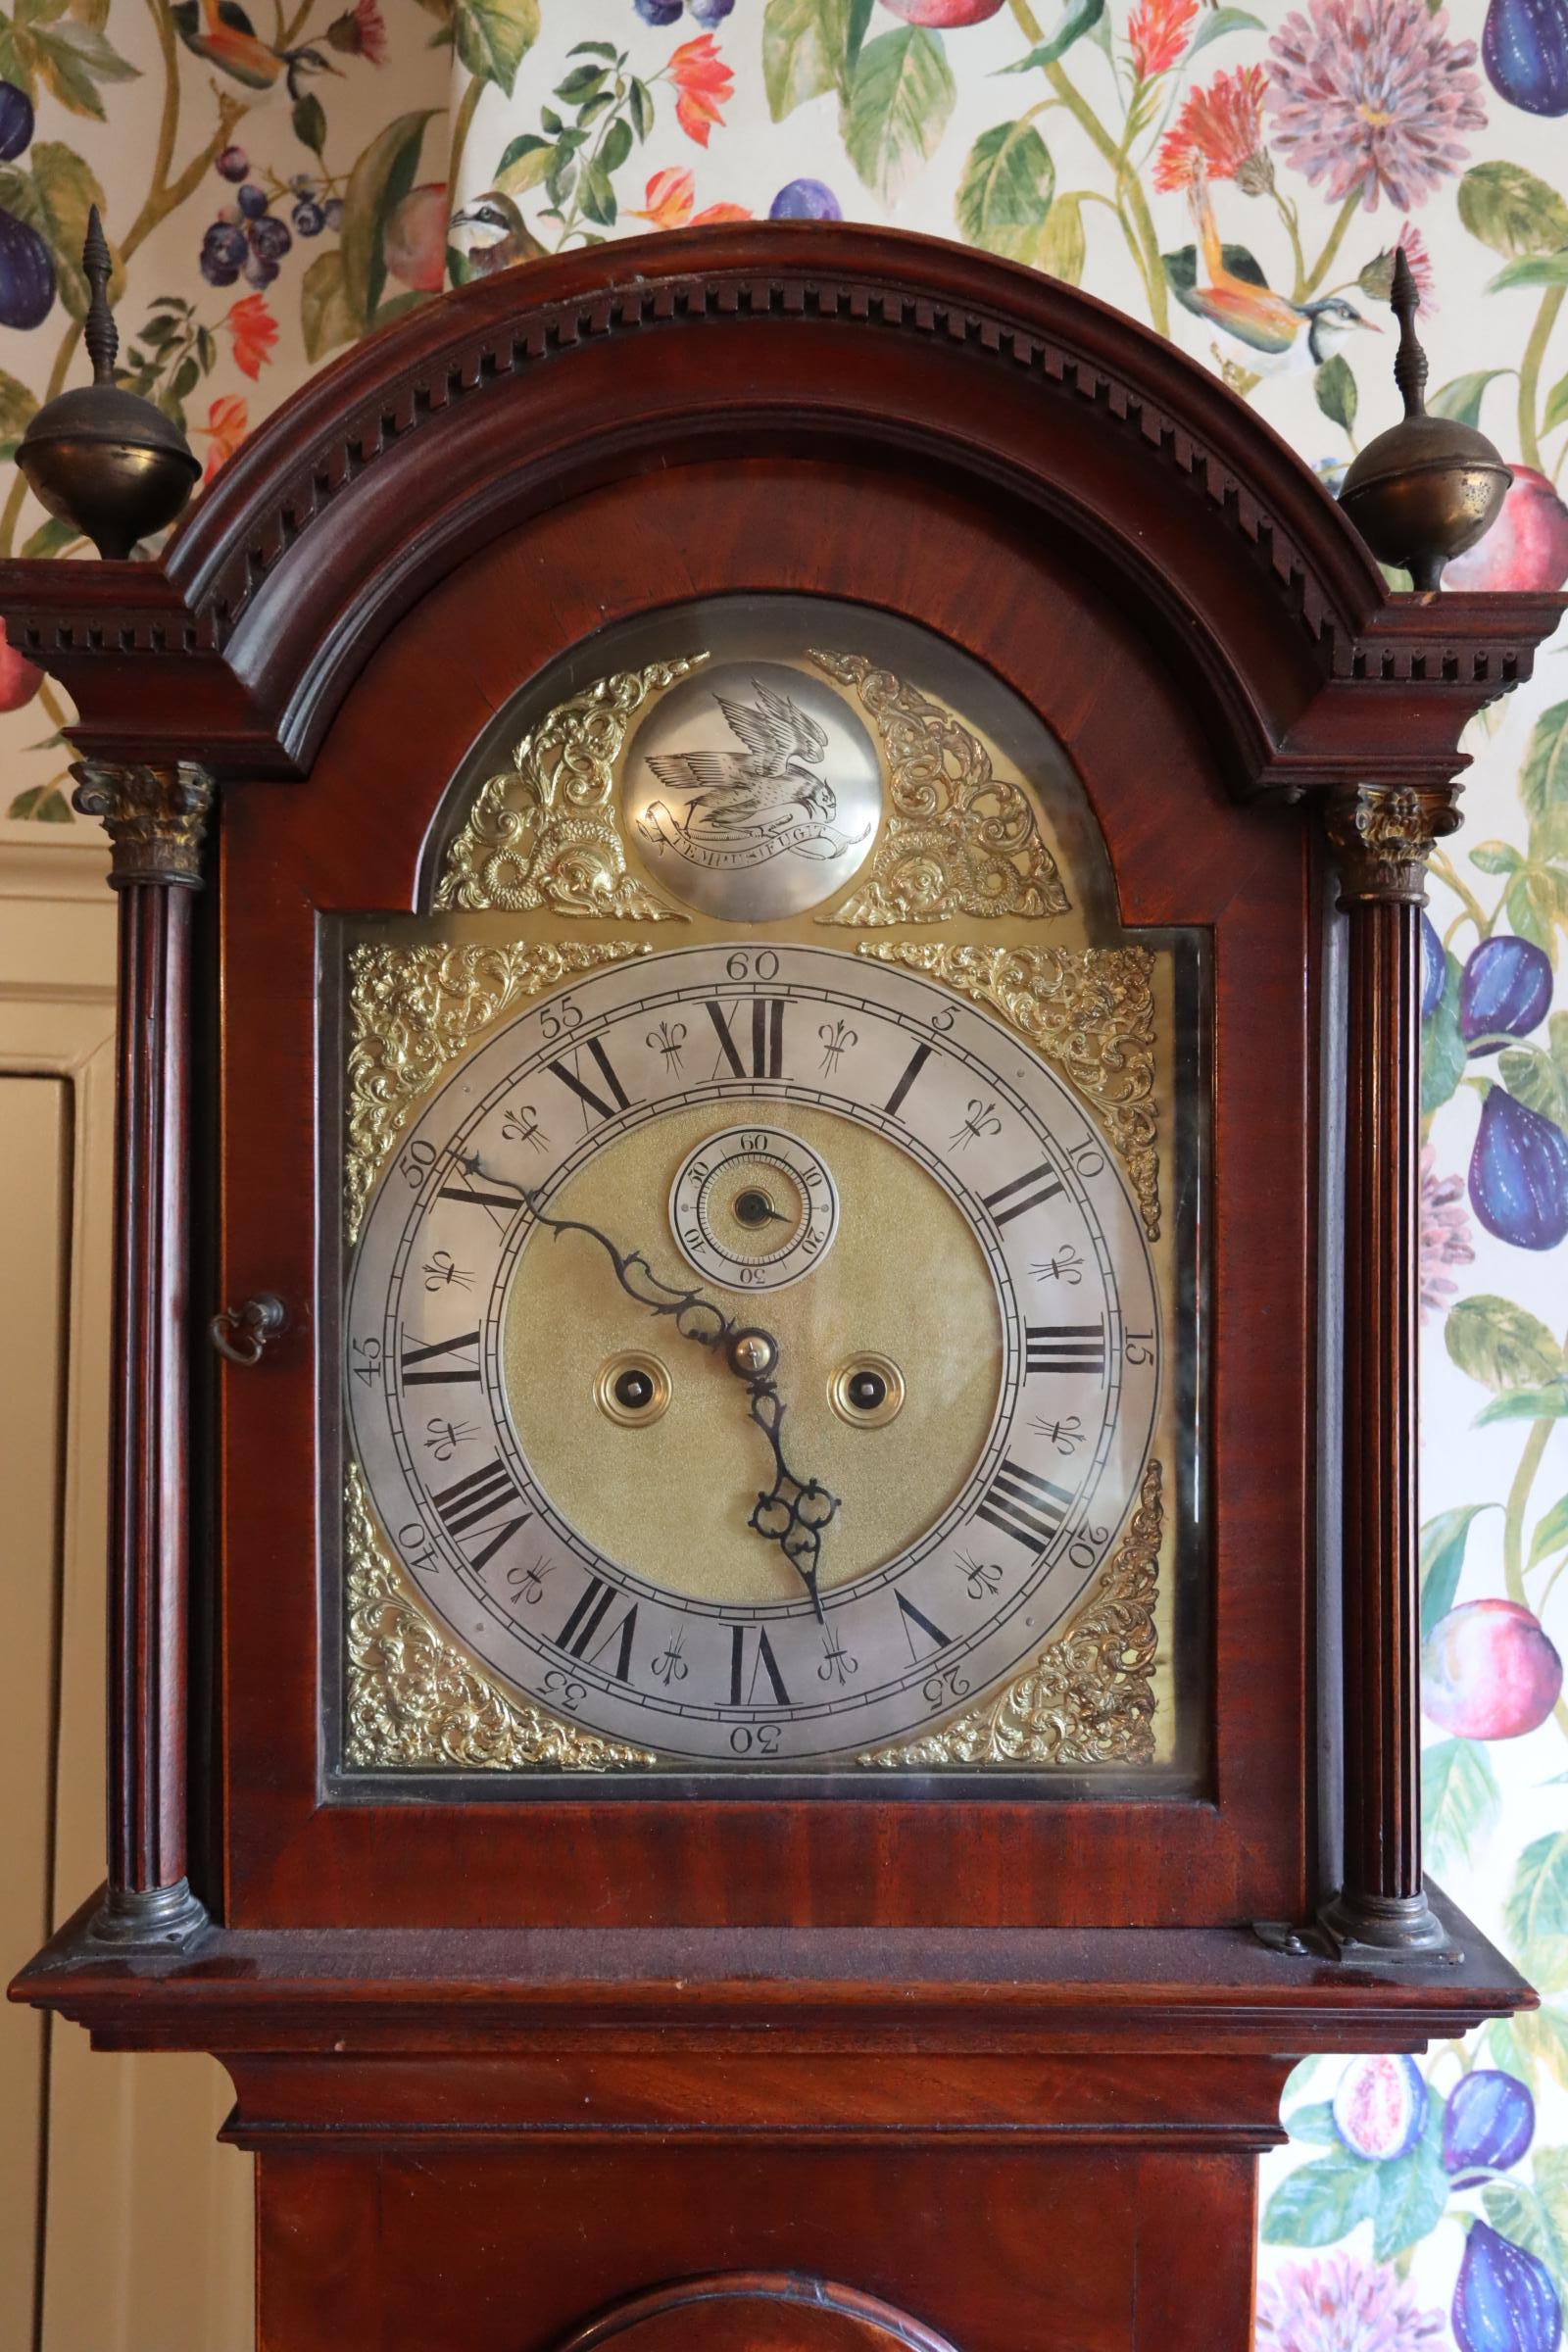 Step into the elegance of the Georgian era with this exquisite mahogany striking longcase clock, a remarkable embodiment of the craftsmanship and style of George III's reign. The warm hues of the mahogany case exude a sense of timeless